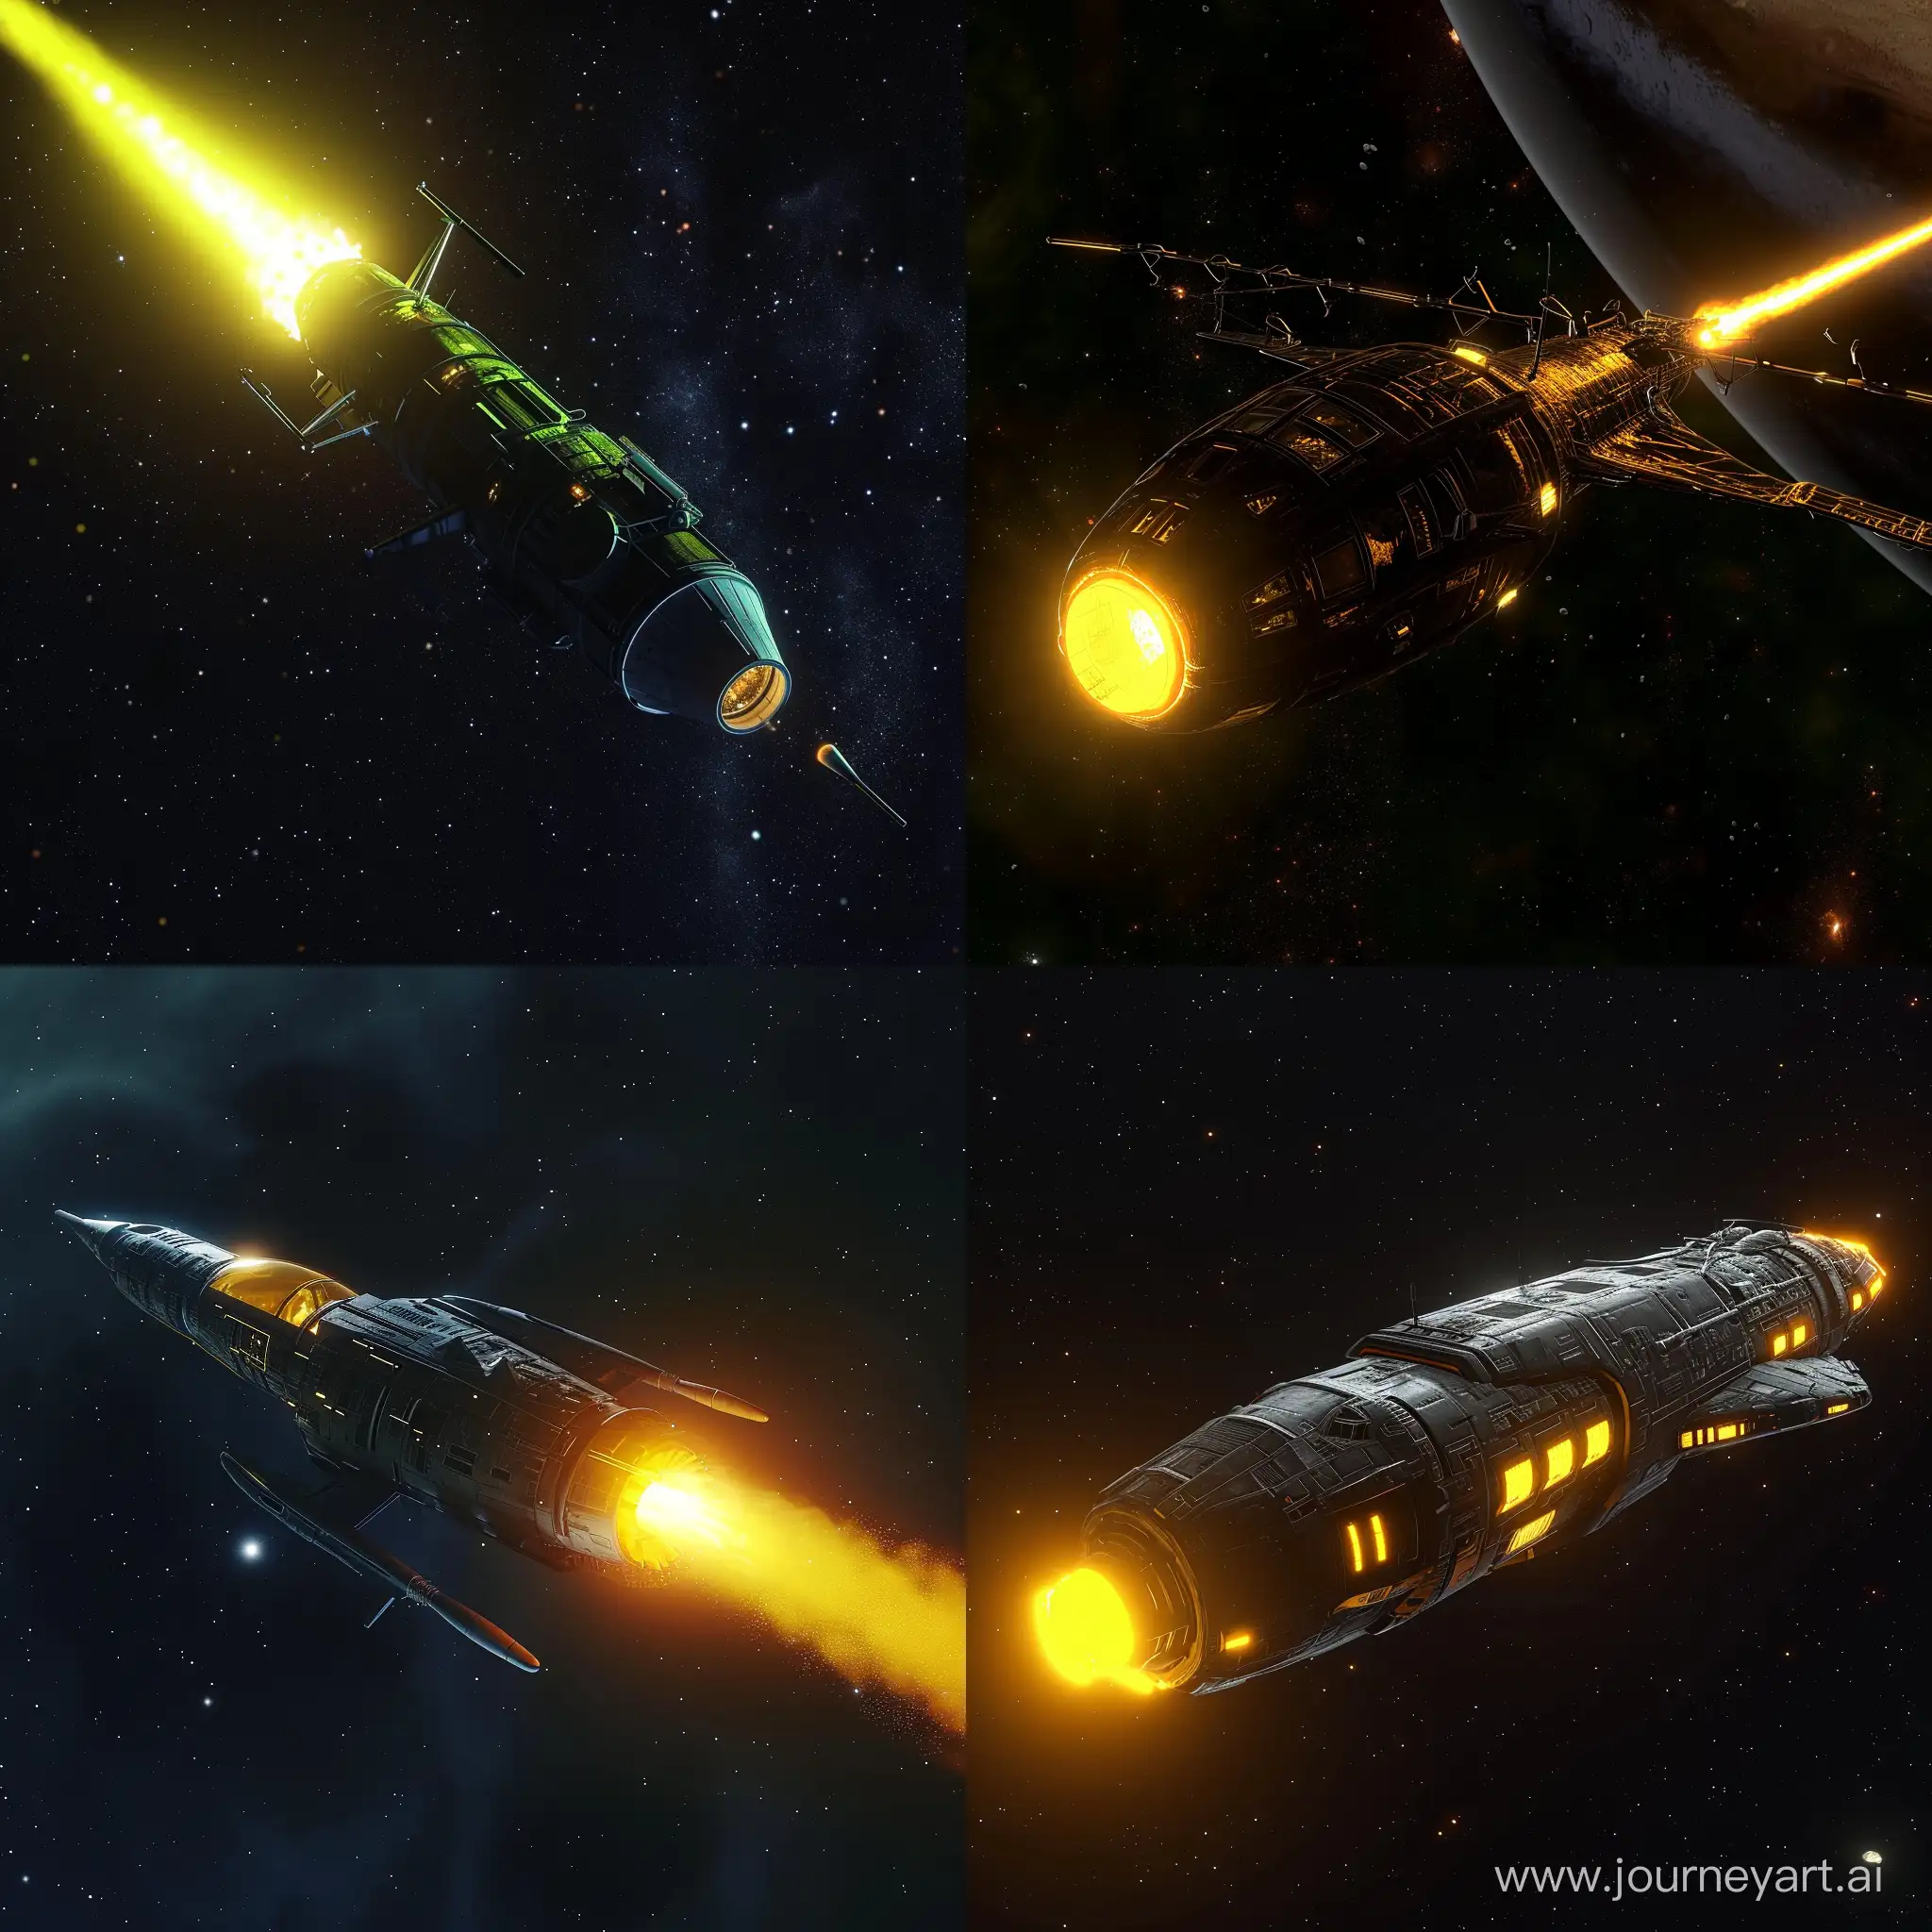 Glowing-Yellow-Probe-Spaceship-in-Space